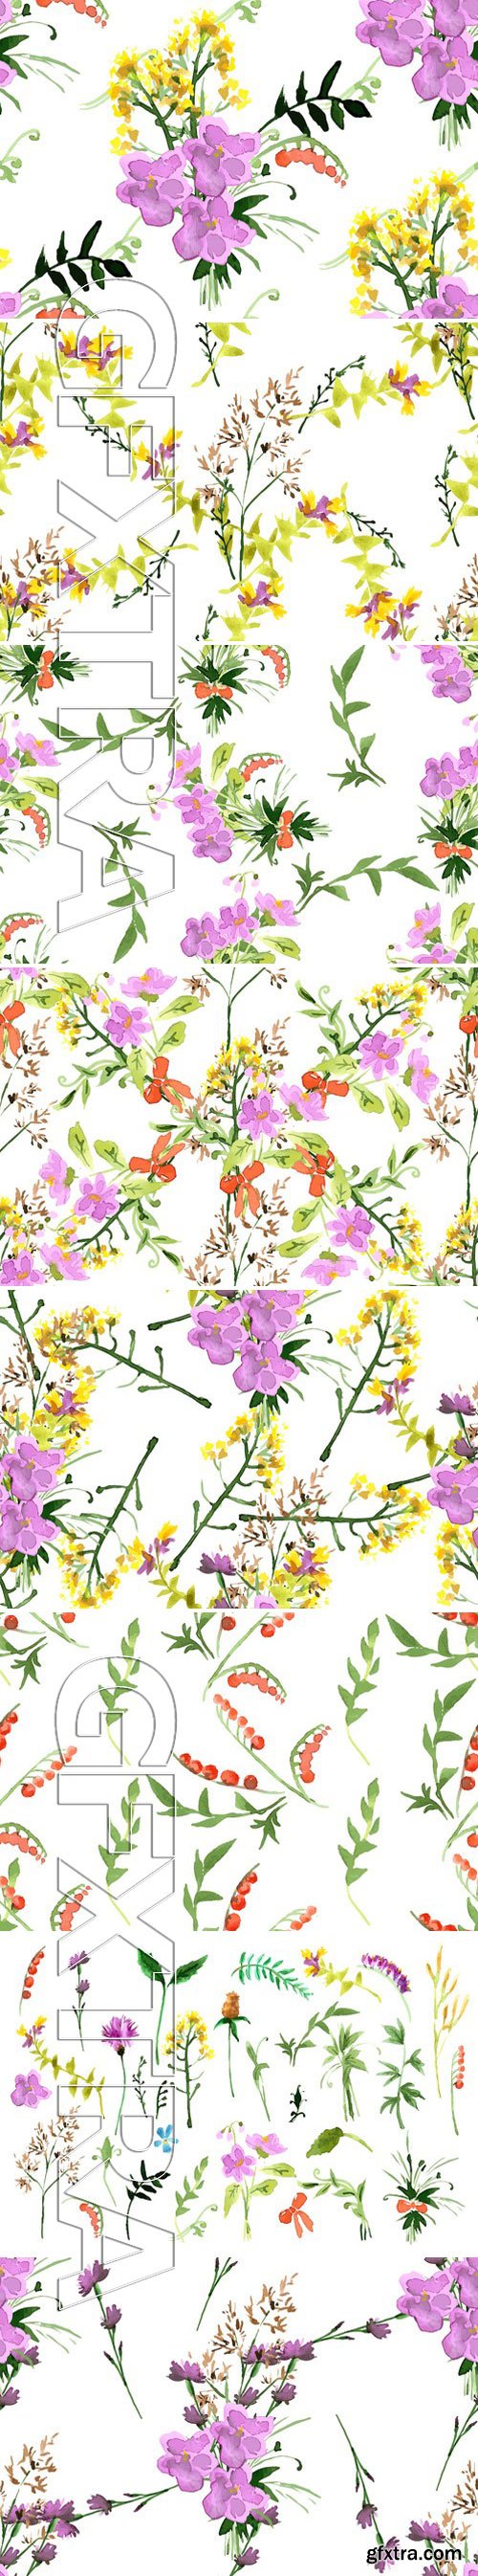 Stock Vectors - Wild Flowers Seamless Pattern On White Background Vector